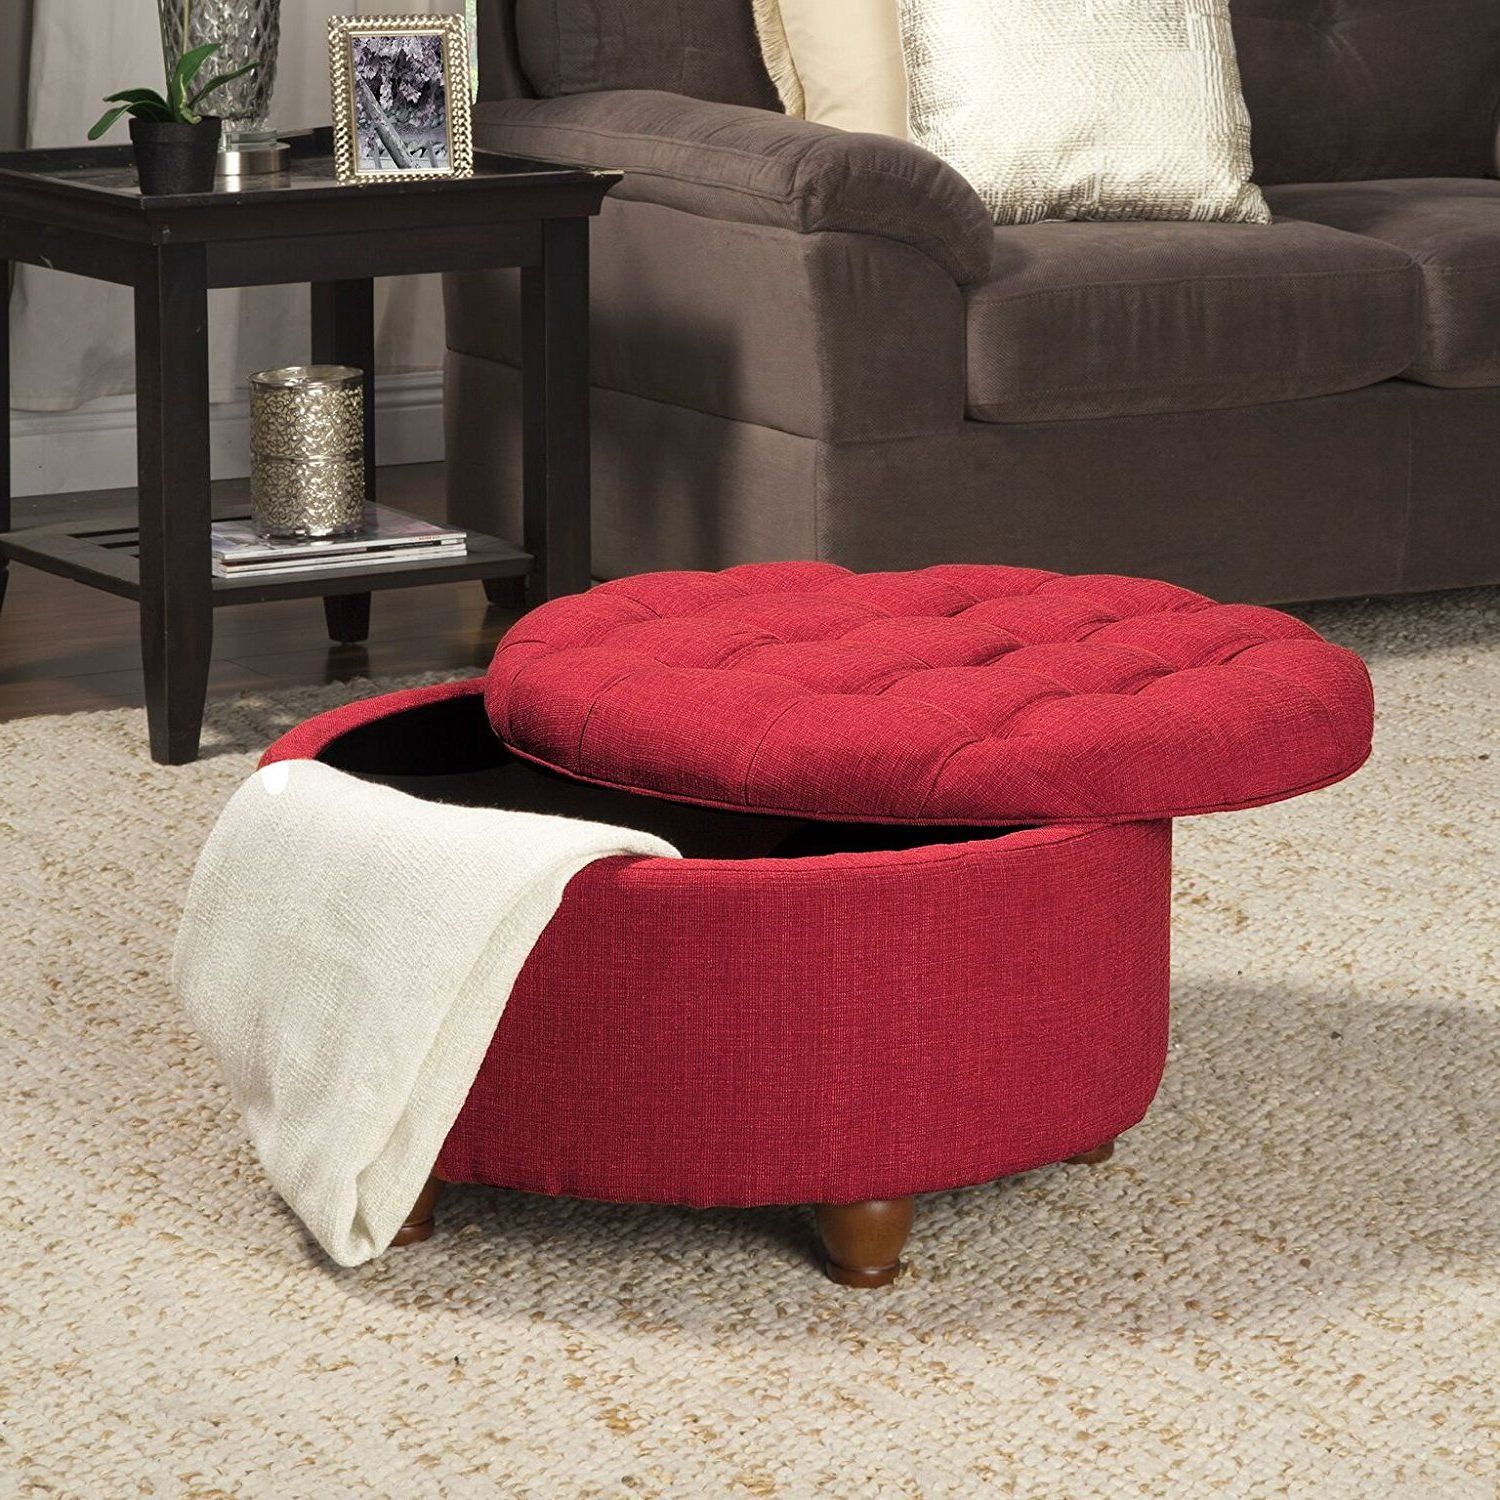 Famous Amazon: Kinfine Round Textured Tufted Storage Ottoman, Red: Kitchen Regarding Gray Fabric Tufted Oval Ottomans (View 2 of 10)